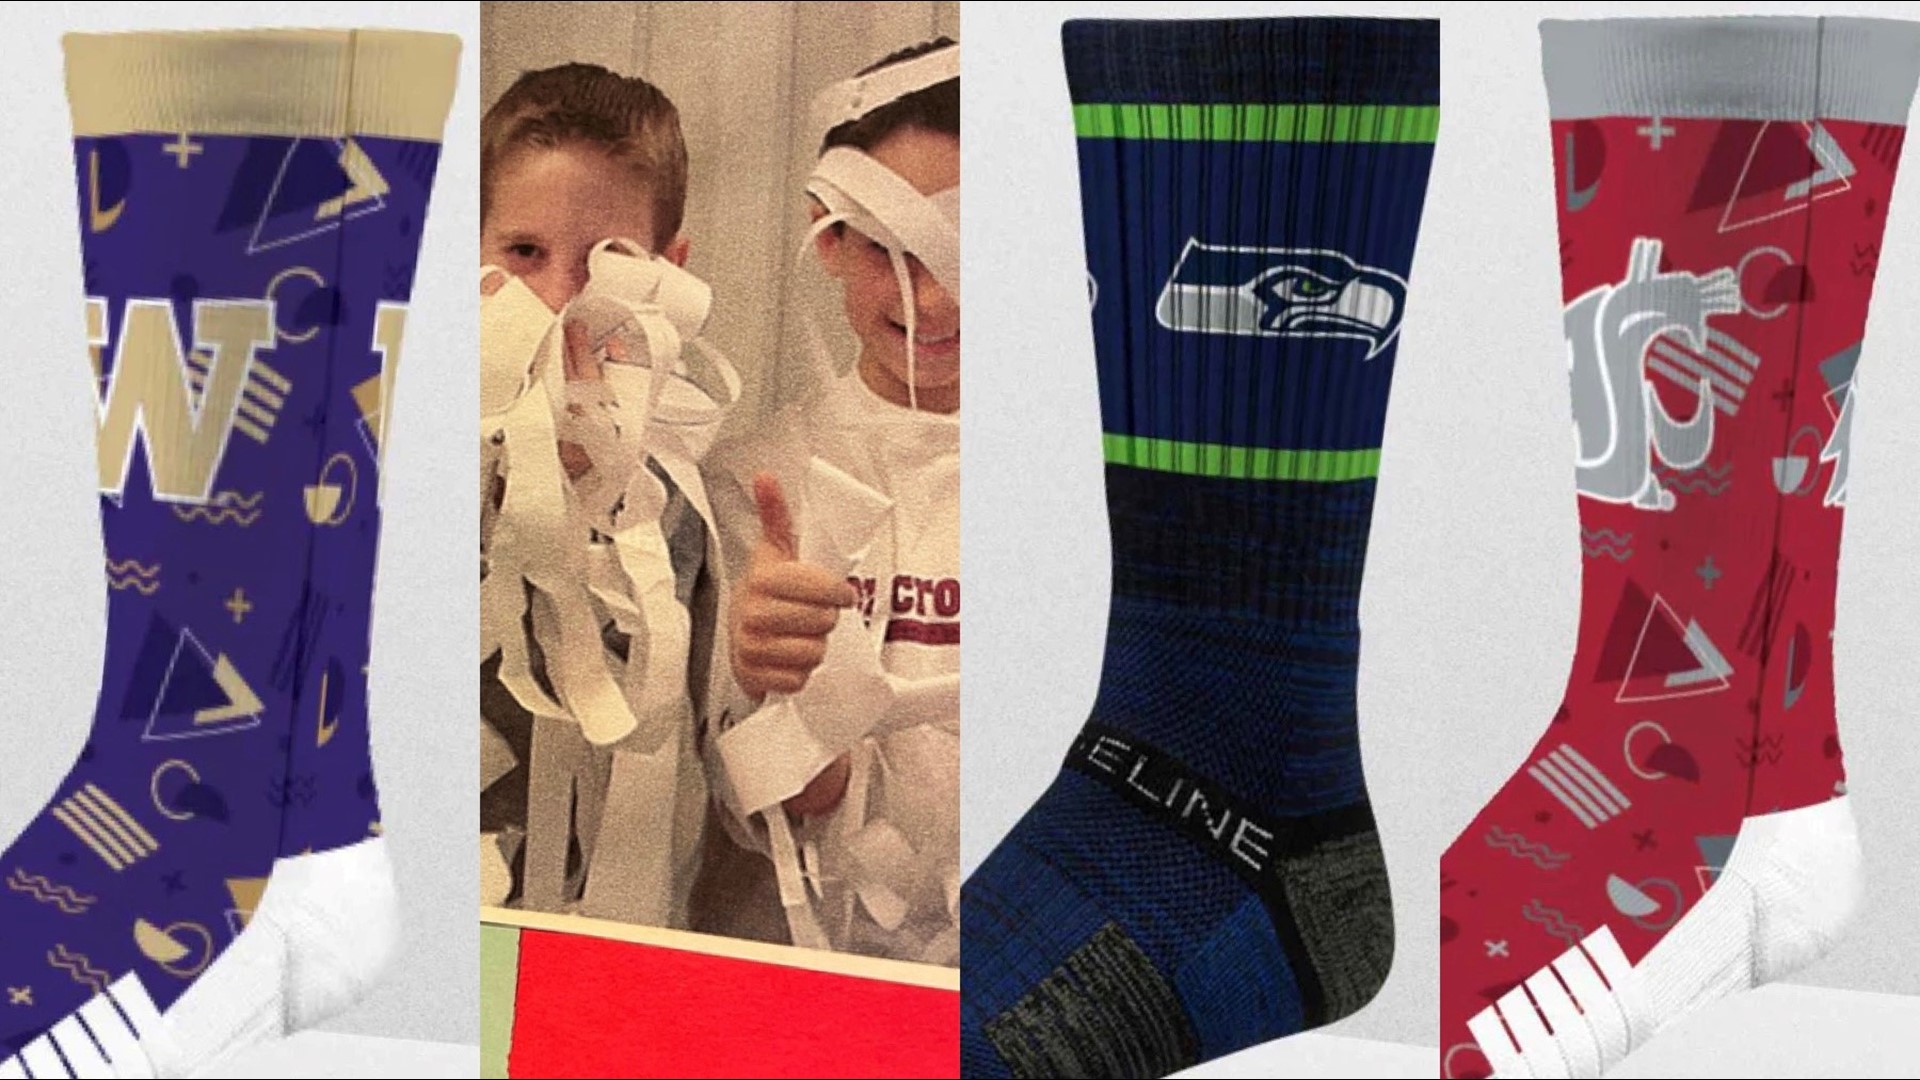 They started their sock empire in high school. #k5evening